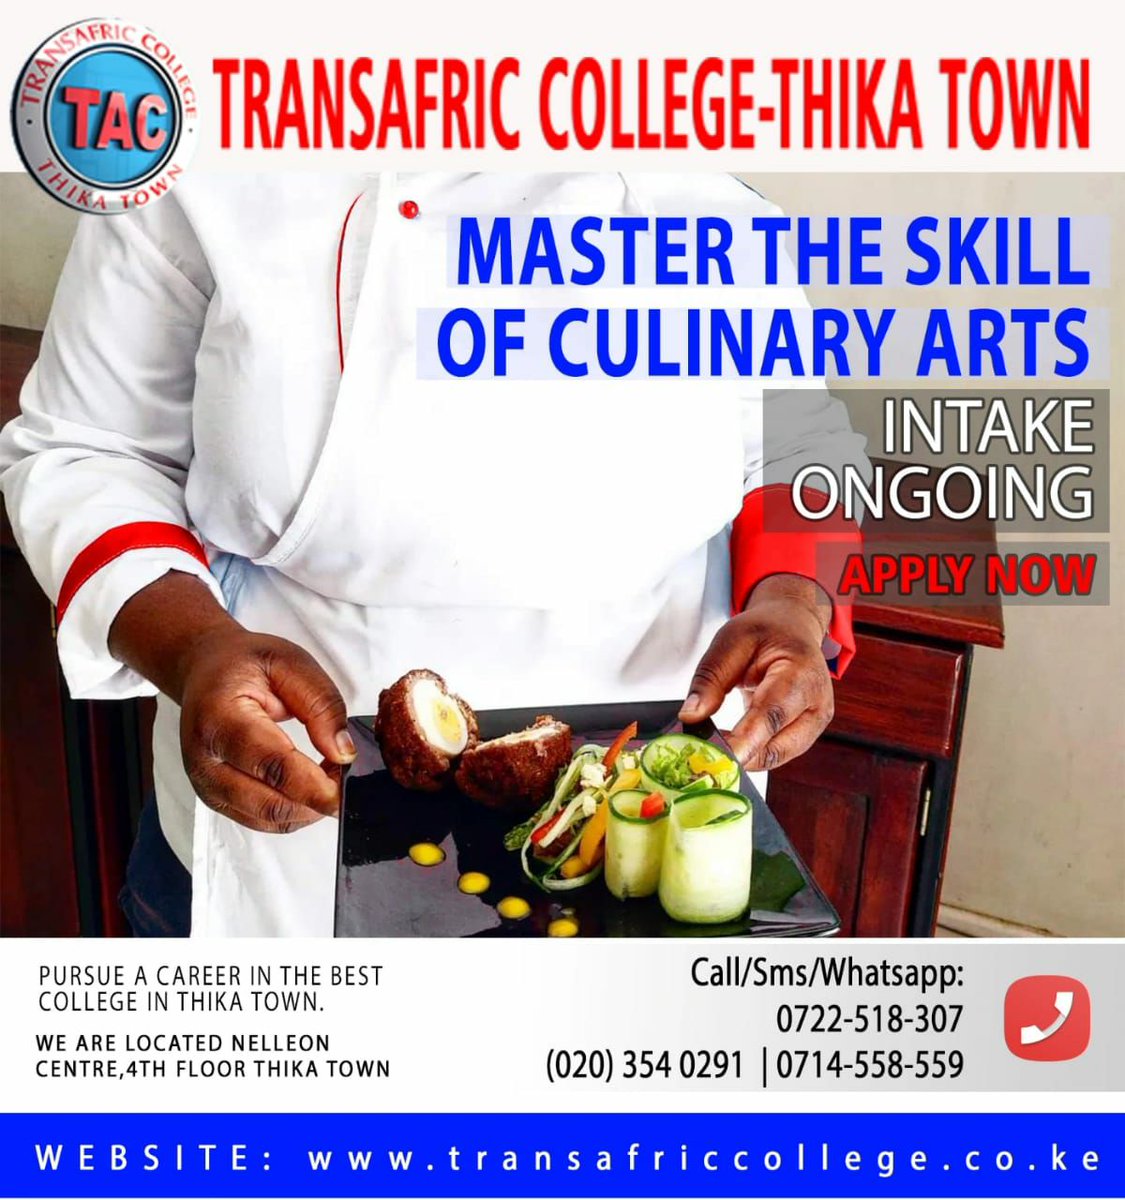 SPONSORED: Master the skills of Culinary Arts at Transafric College - Thika in the ongoing intake Call 0722518307 to enroll now